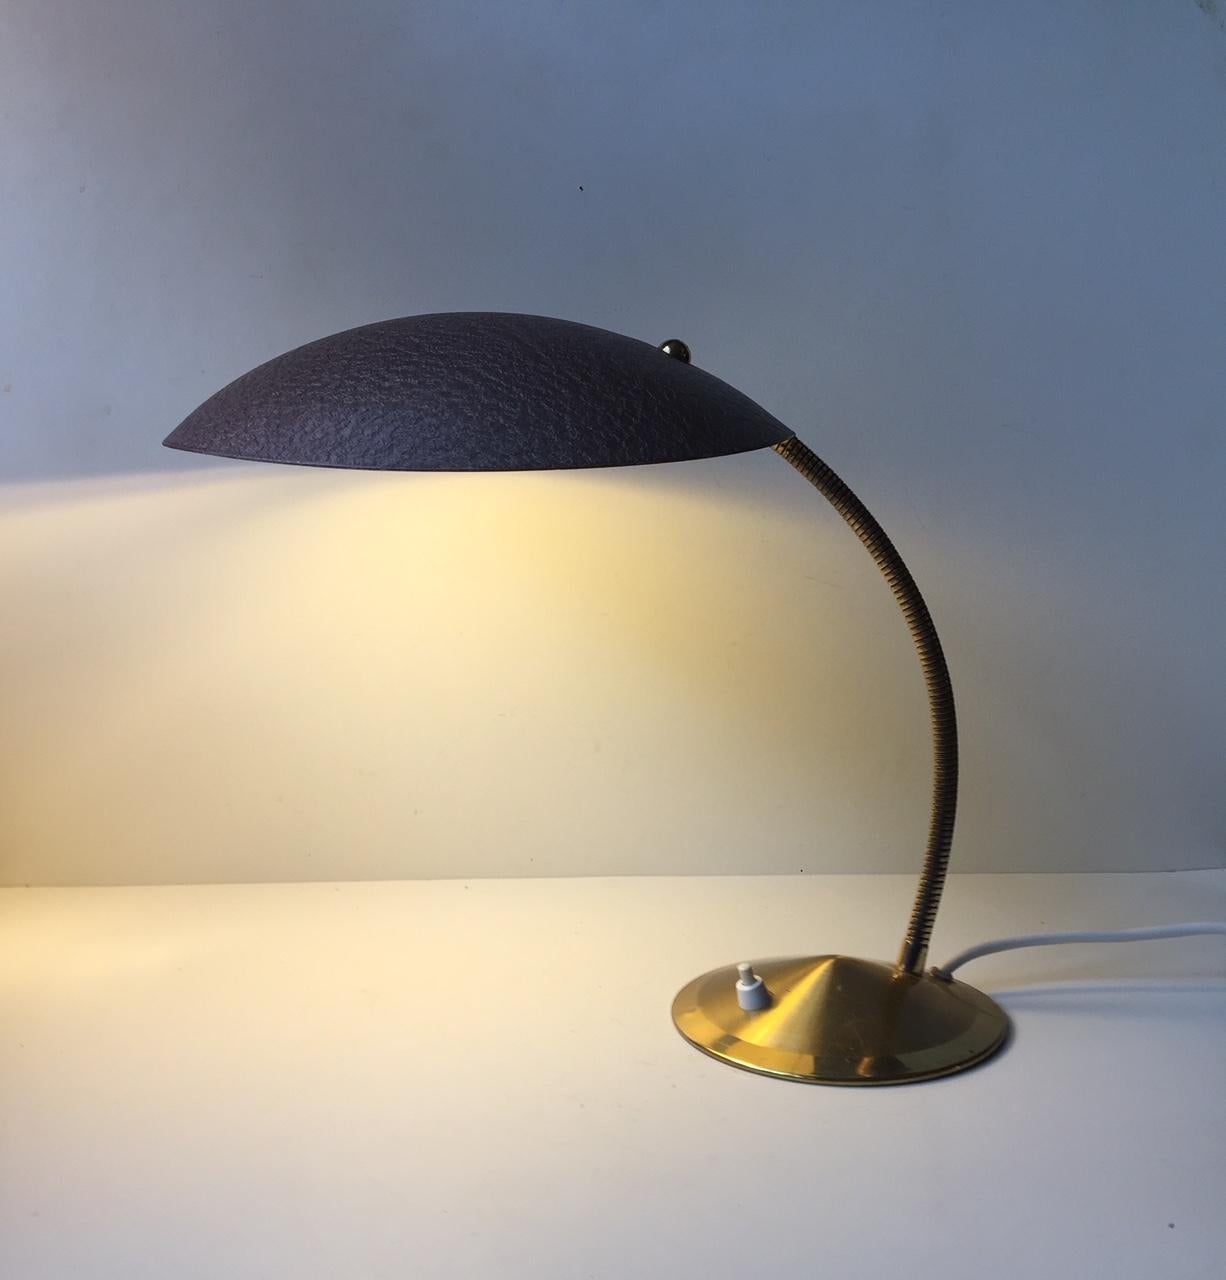 Some attributes the design of this desk light to Carl Auböck, but it is in fact Italian and the style is reminiscent of designs from Lumi and Stilnovo. The conical base and the fully adjustable gooseneck is made from brass and the shade is made from